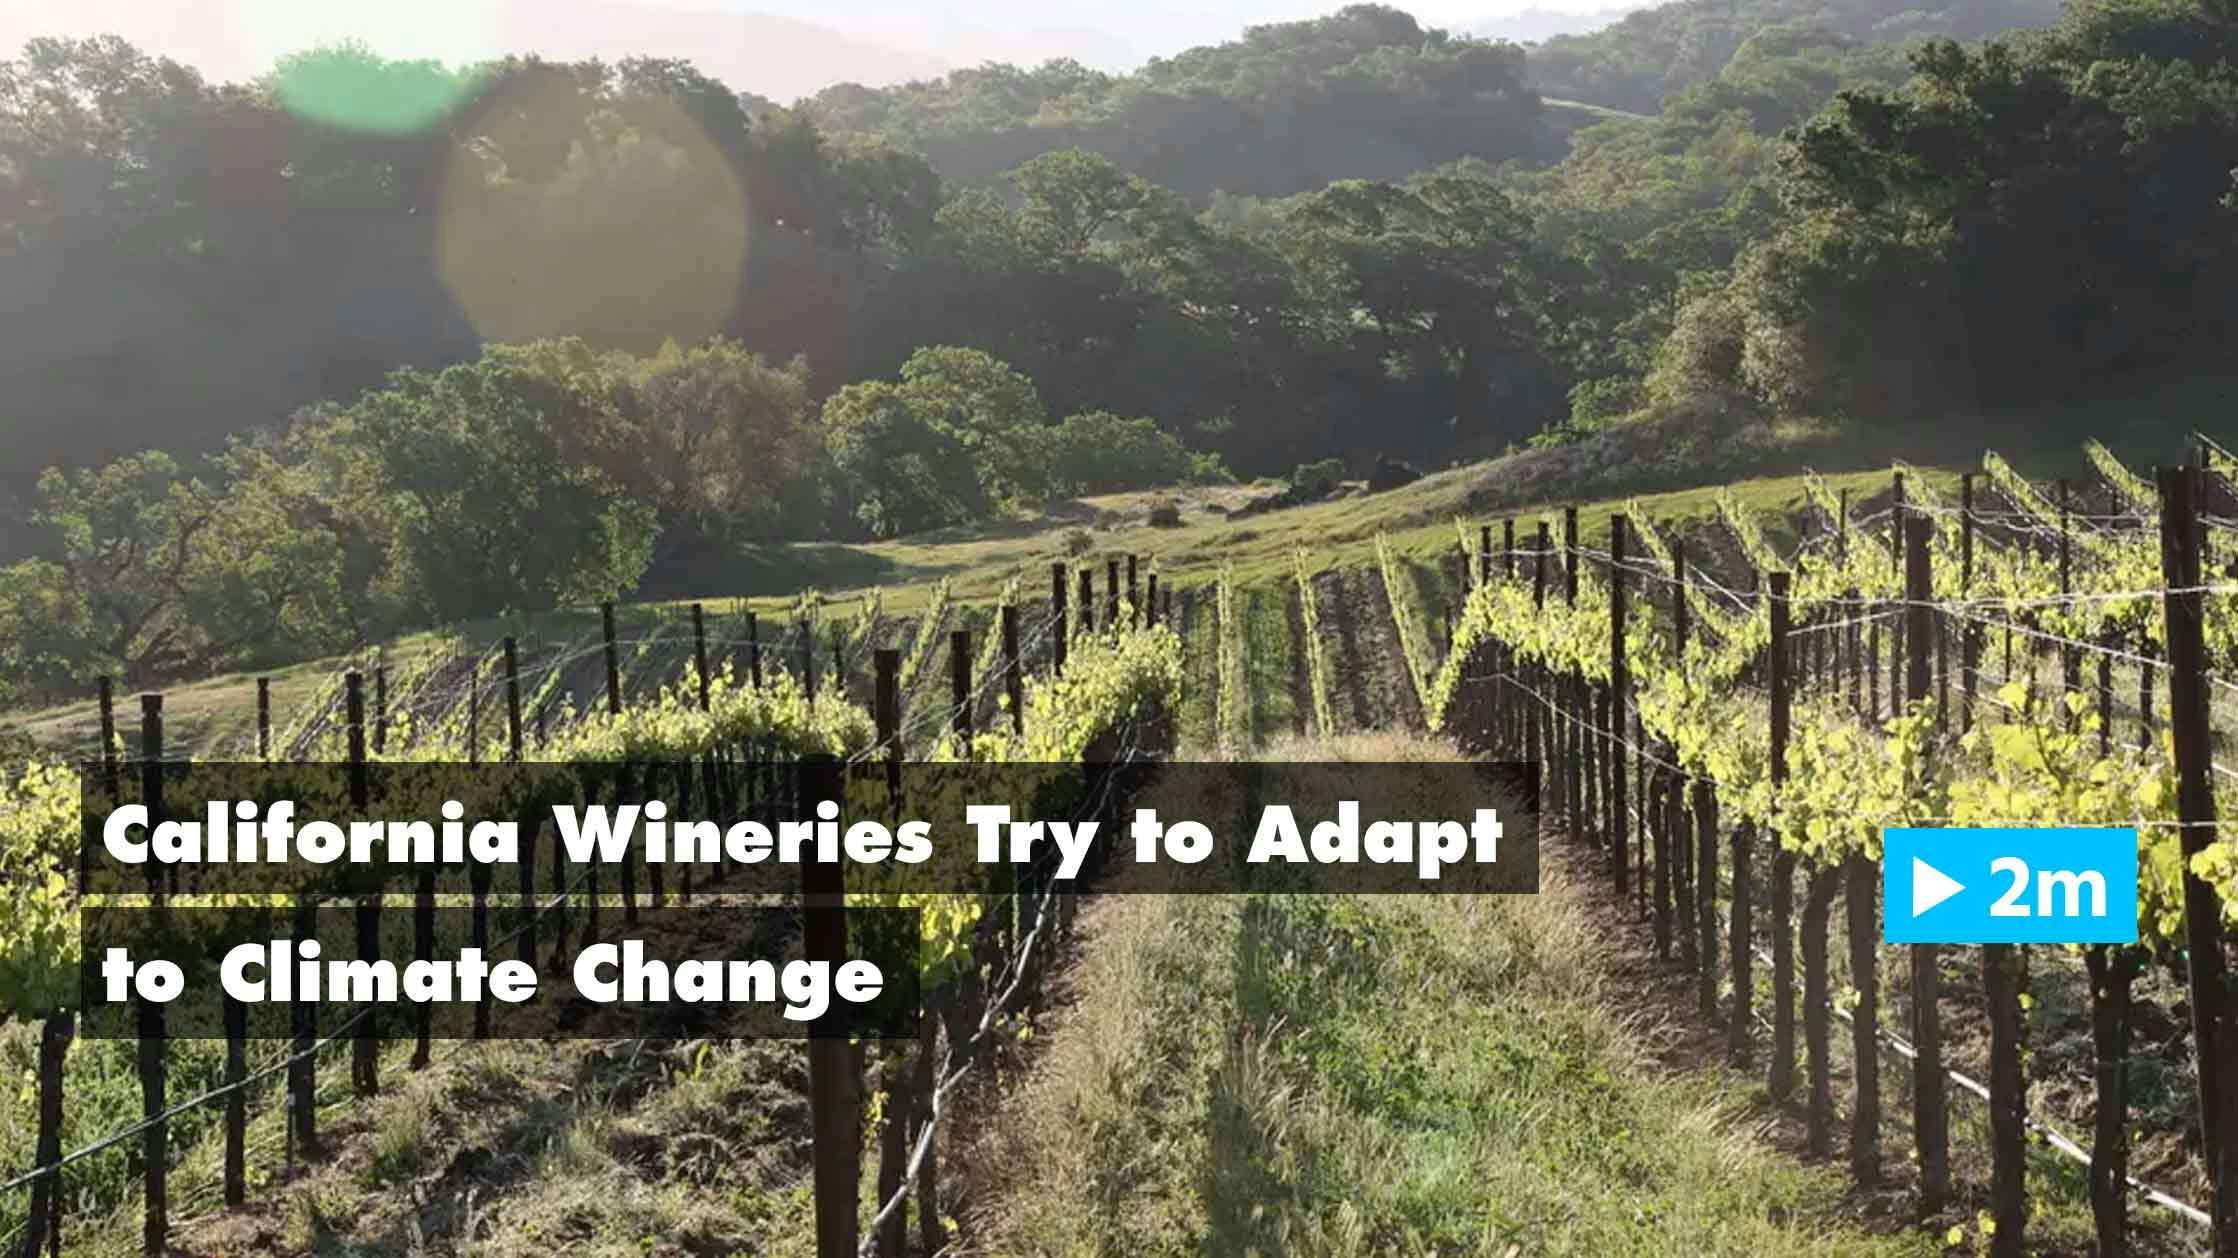 California wineries try to adapt to climate change